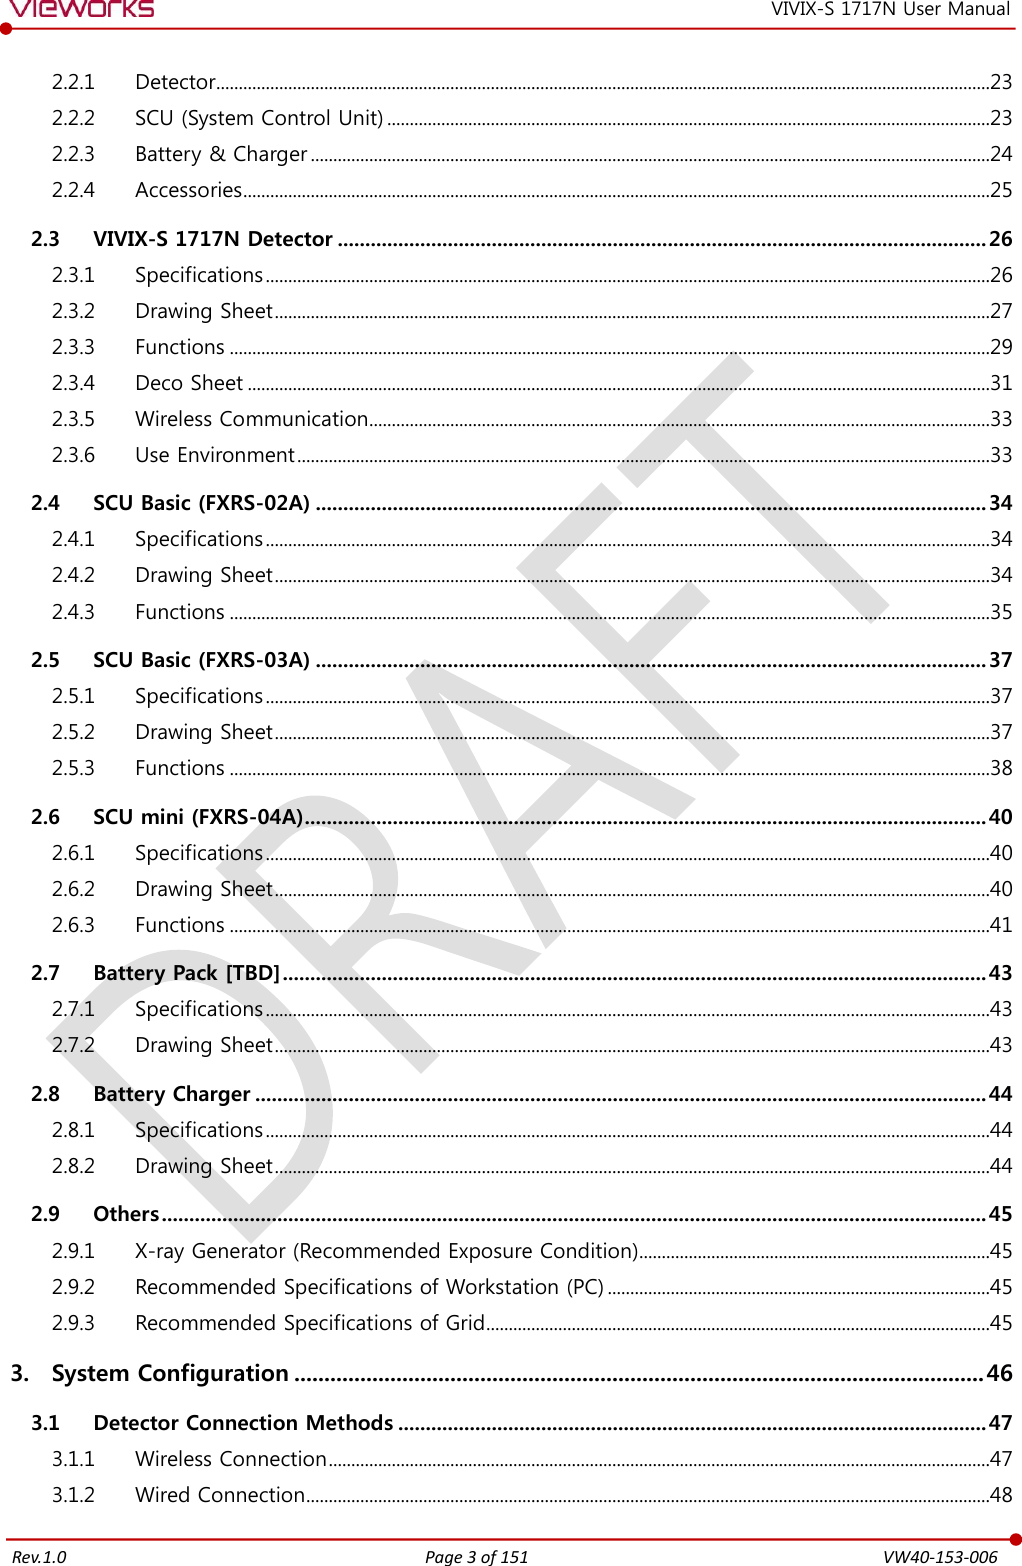   Rev.1.0 Page 3 of 151  VW40-153-006 VIVIX-S 1717N User Manual 2.2.1  Detector............................................................................................................................................................................23 2.2.2  SCU (System Control Unit) ......................................................................................................................................23 2.2.3  Battery &amp; Charger .......................................................................................................................................................24 2.2.4  Accessories ......................................................................................................................................................................25 2.3 VIVIX-S 1717N Detector ...................................................................................................................... 26 2.3.1  Specifications .................................................................................................................................................................26 2.3.2  Drawing Sheet ...............................................................................................................................................................27 2.3.3  Functions .........................................................................................................................................................................29 2.3.4  Deco Sheet .....................................................................................................................................................................31 2.3.5  Wireless Communication..........................................................................................................................................33 2.3.6  Use Environment ..........................................................................................................................................................33 2.4 SCU Basic (FXRS-02A) .......................................................................................................................... 34 2.4.1  Specifications .................................................................................................................................................................34 2.4.2  Drawing Sheet ...............................................................................................................................................................34 2.4.3  Functions .........................................................................................................................................................................35 2.5 SCU Basic (FXRS-03A) .......................................................................................................................... 37 2.5.1  Specifications .................................................................................................................................................................37 2.5.2  Drawing Sheet ...............................................................................................................................................................37 2.5.3  Functions .........................................................................................................................................................................38 2.6 SCU mini (FXRS-04A) ............................................................................................................................ 40 2.6.1  Specifications .................................................................................................................................................................40 2.6.2  Drawing Sheet ...............................................................................................................................................................40 2.6.3  Functions .........................................................................................................................................................................41 2.7 Battery Pack [TBD] ................................................................................................................................ 43 2.7.1  Specifications .................................................................................................................................................................43 2.7.2  Drawing Sheet ...............................................................................................................................................................43 2.8 Battery Charger ..................................................................................................................................... 44 2.8.1  Specifications .................................................................................................................................................................44 2.8.2  Drawing Sheet ...............................................................................................................................................................44 2.9 Others ...................................................................................................................................................... 45 2.9.1  X-ray Generator (Recommended Exposure Condition)..............................................................................45 2.9.2  Recommended Specifications of Workstation (PC) .....................................................................................45 2.9.3  Recommended Specifications of Grid ................................................................................................................45 3. System Configuration ................................................................................................................... 46 3.1 Detector Connection Methods ........................................................................................................... 47 3.1.1  Wireless Connection ...................................................................................................................................................47 3.1.2  Wired Connection ........................................................................................................................................................48 